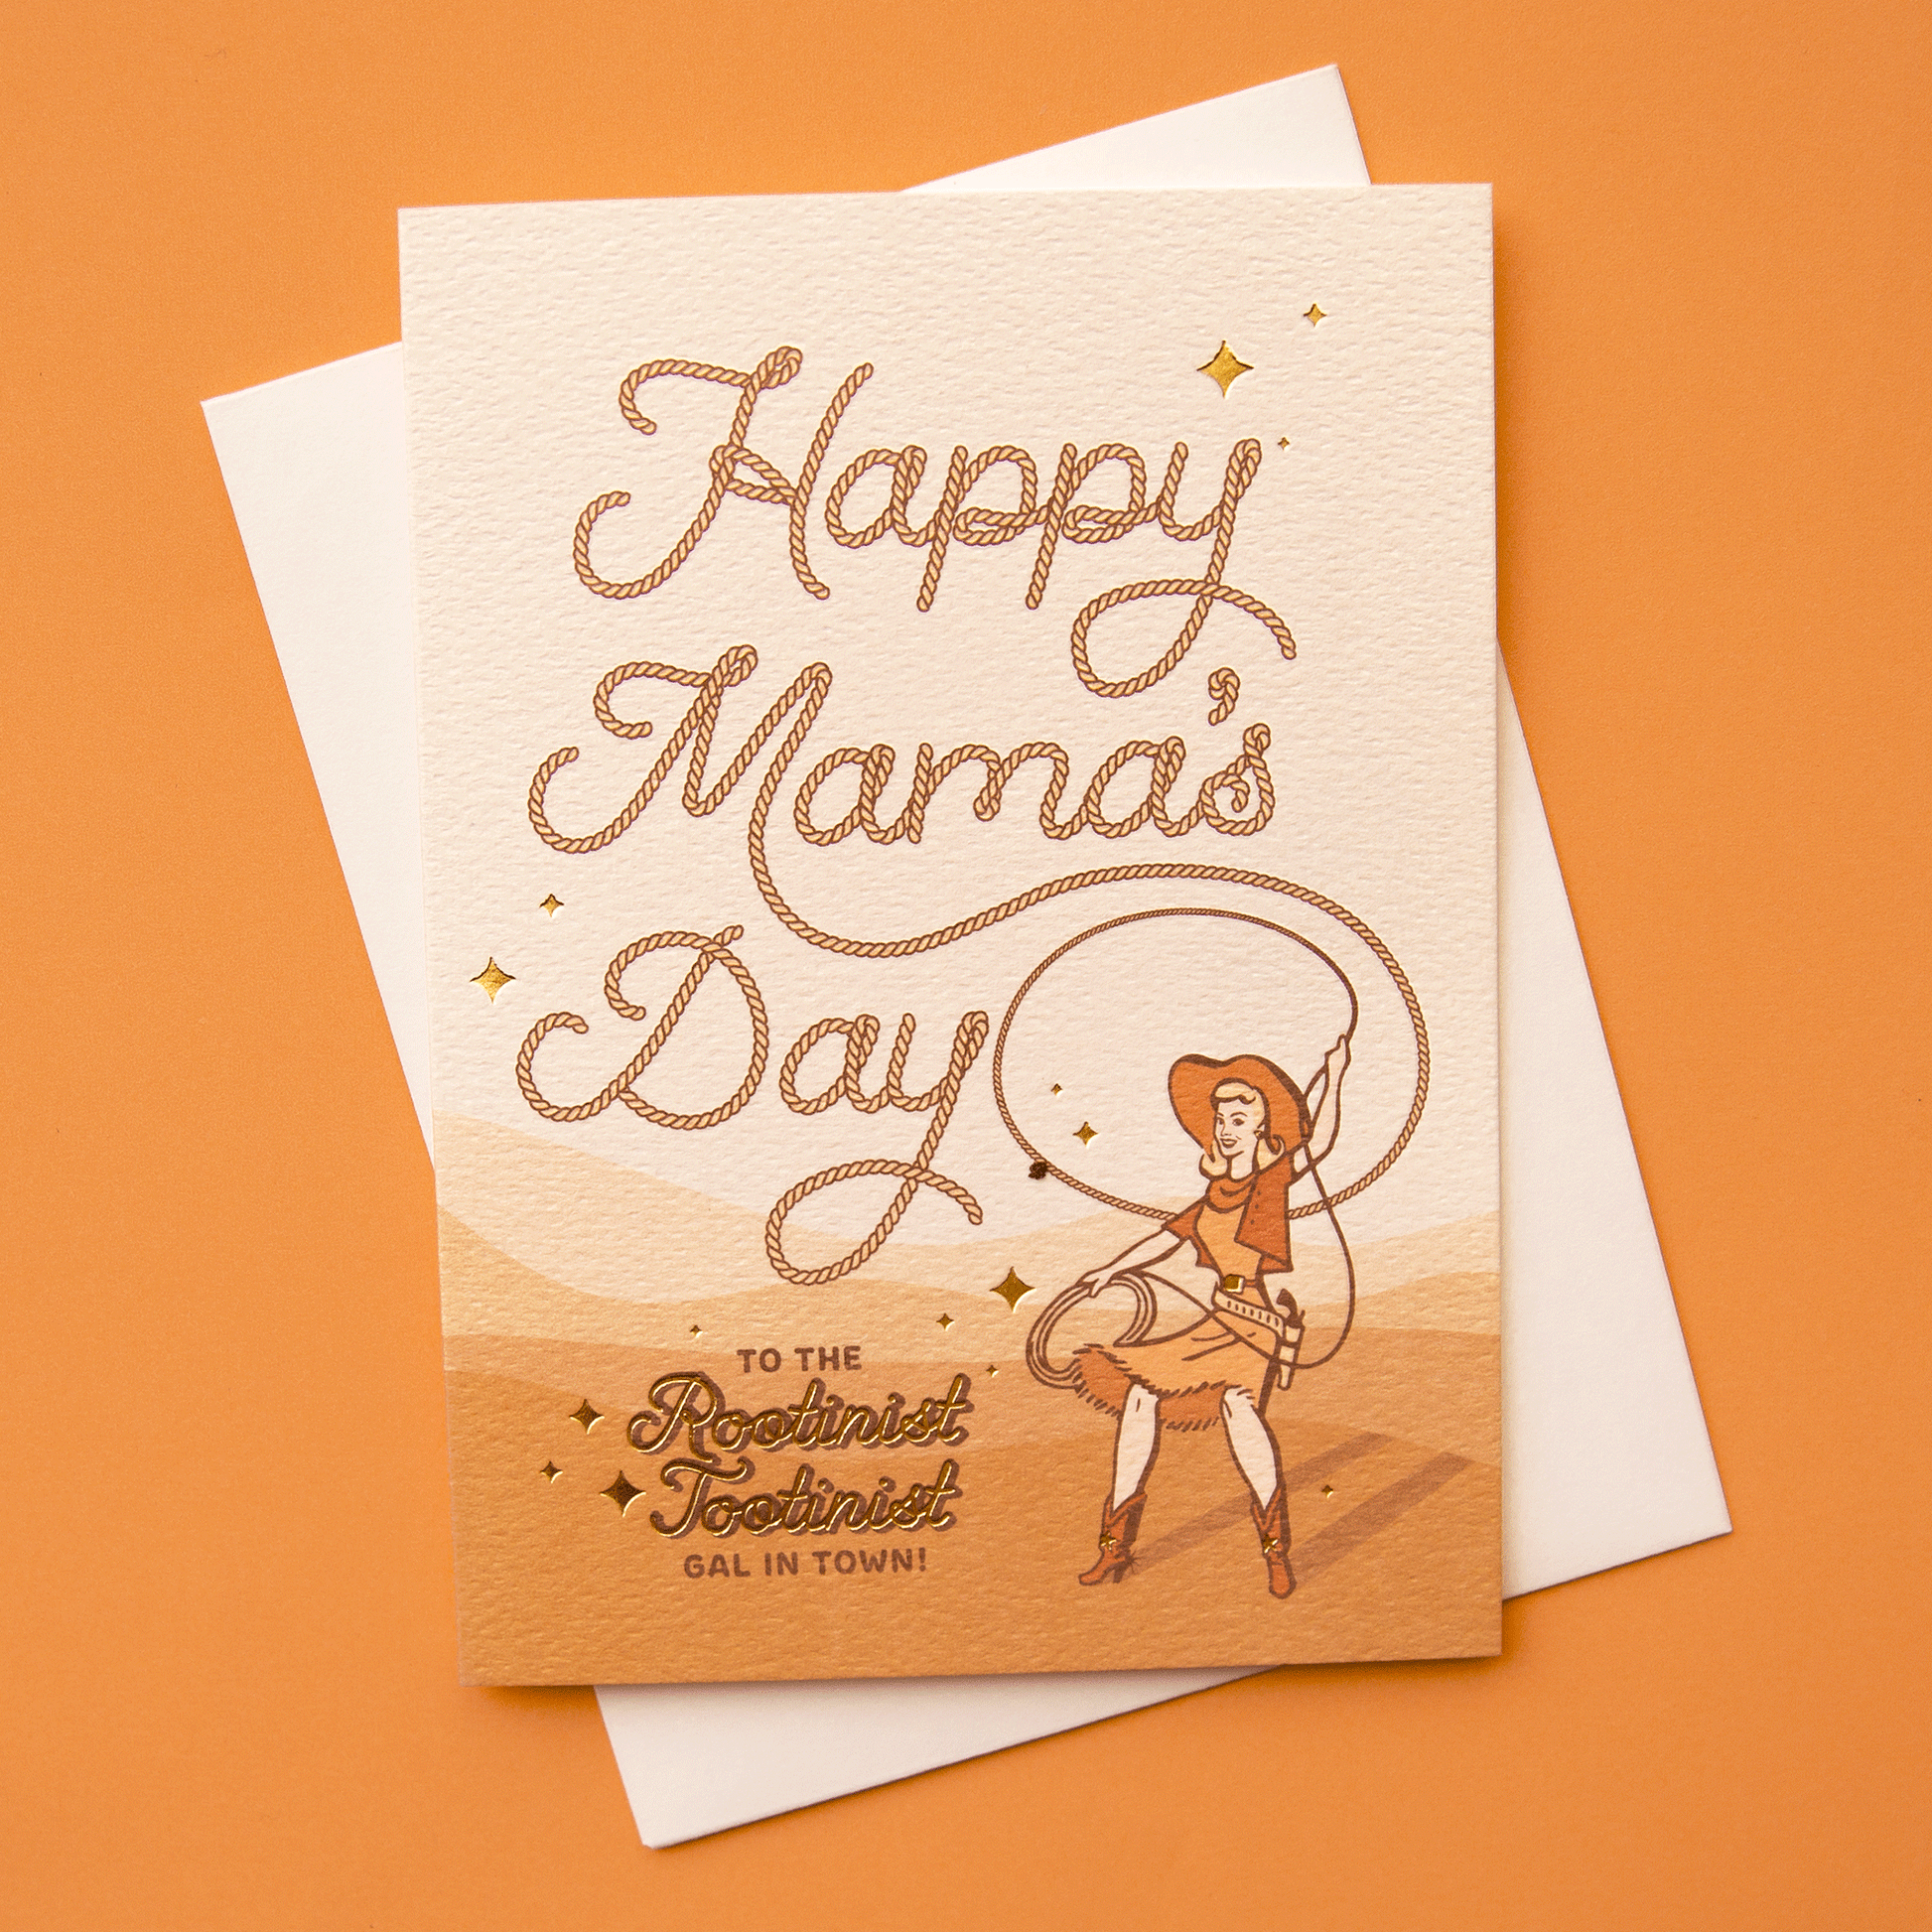 On an orange background is a orange and tan card with rope styled text that reads, "Happy Mama's Day To The Rootinist Tootinist Gal In Town!" along with a women with a cowgirl hat and lasso.